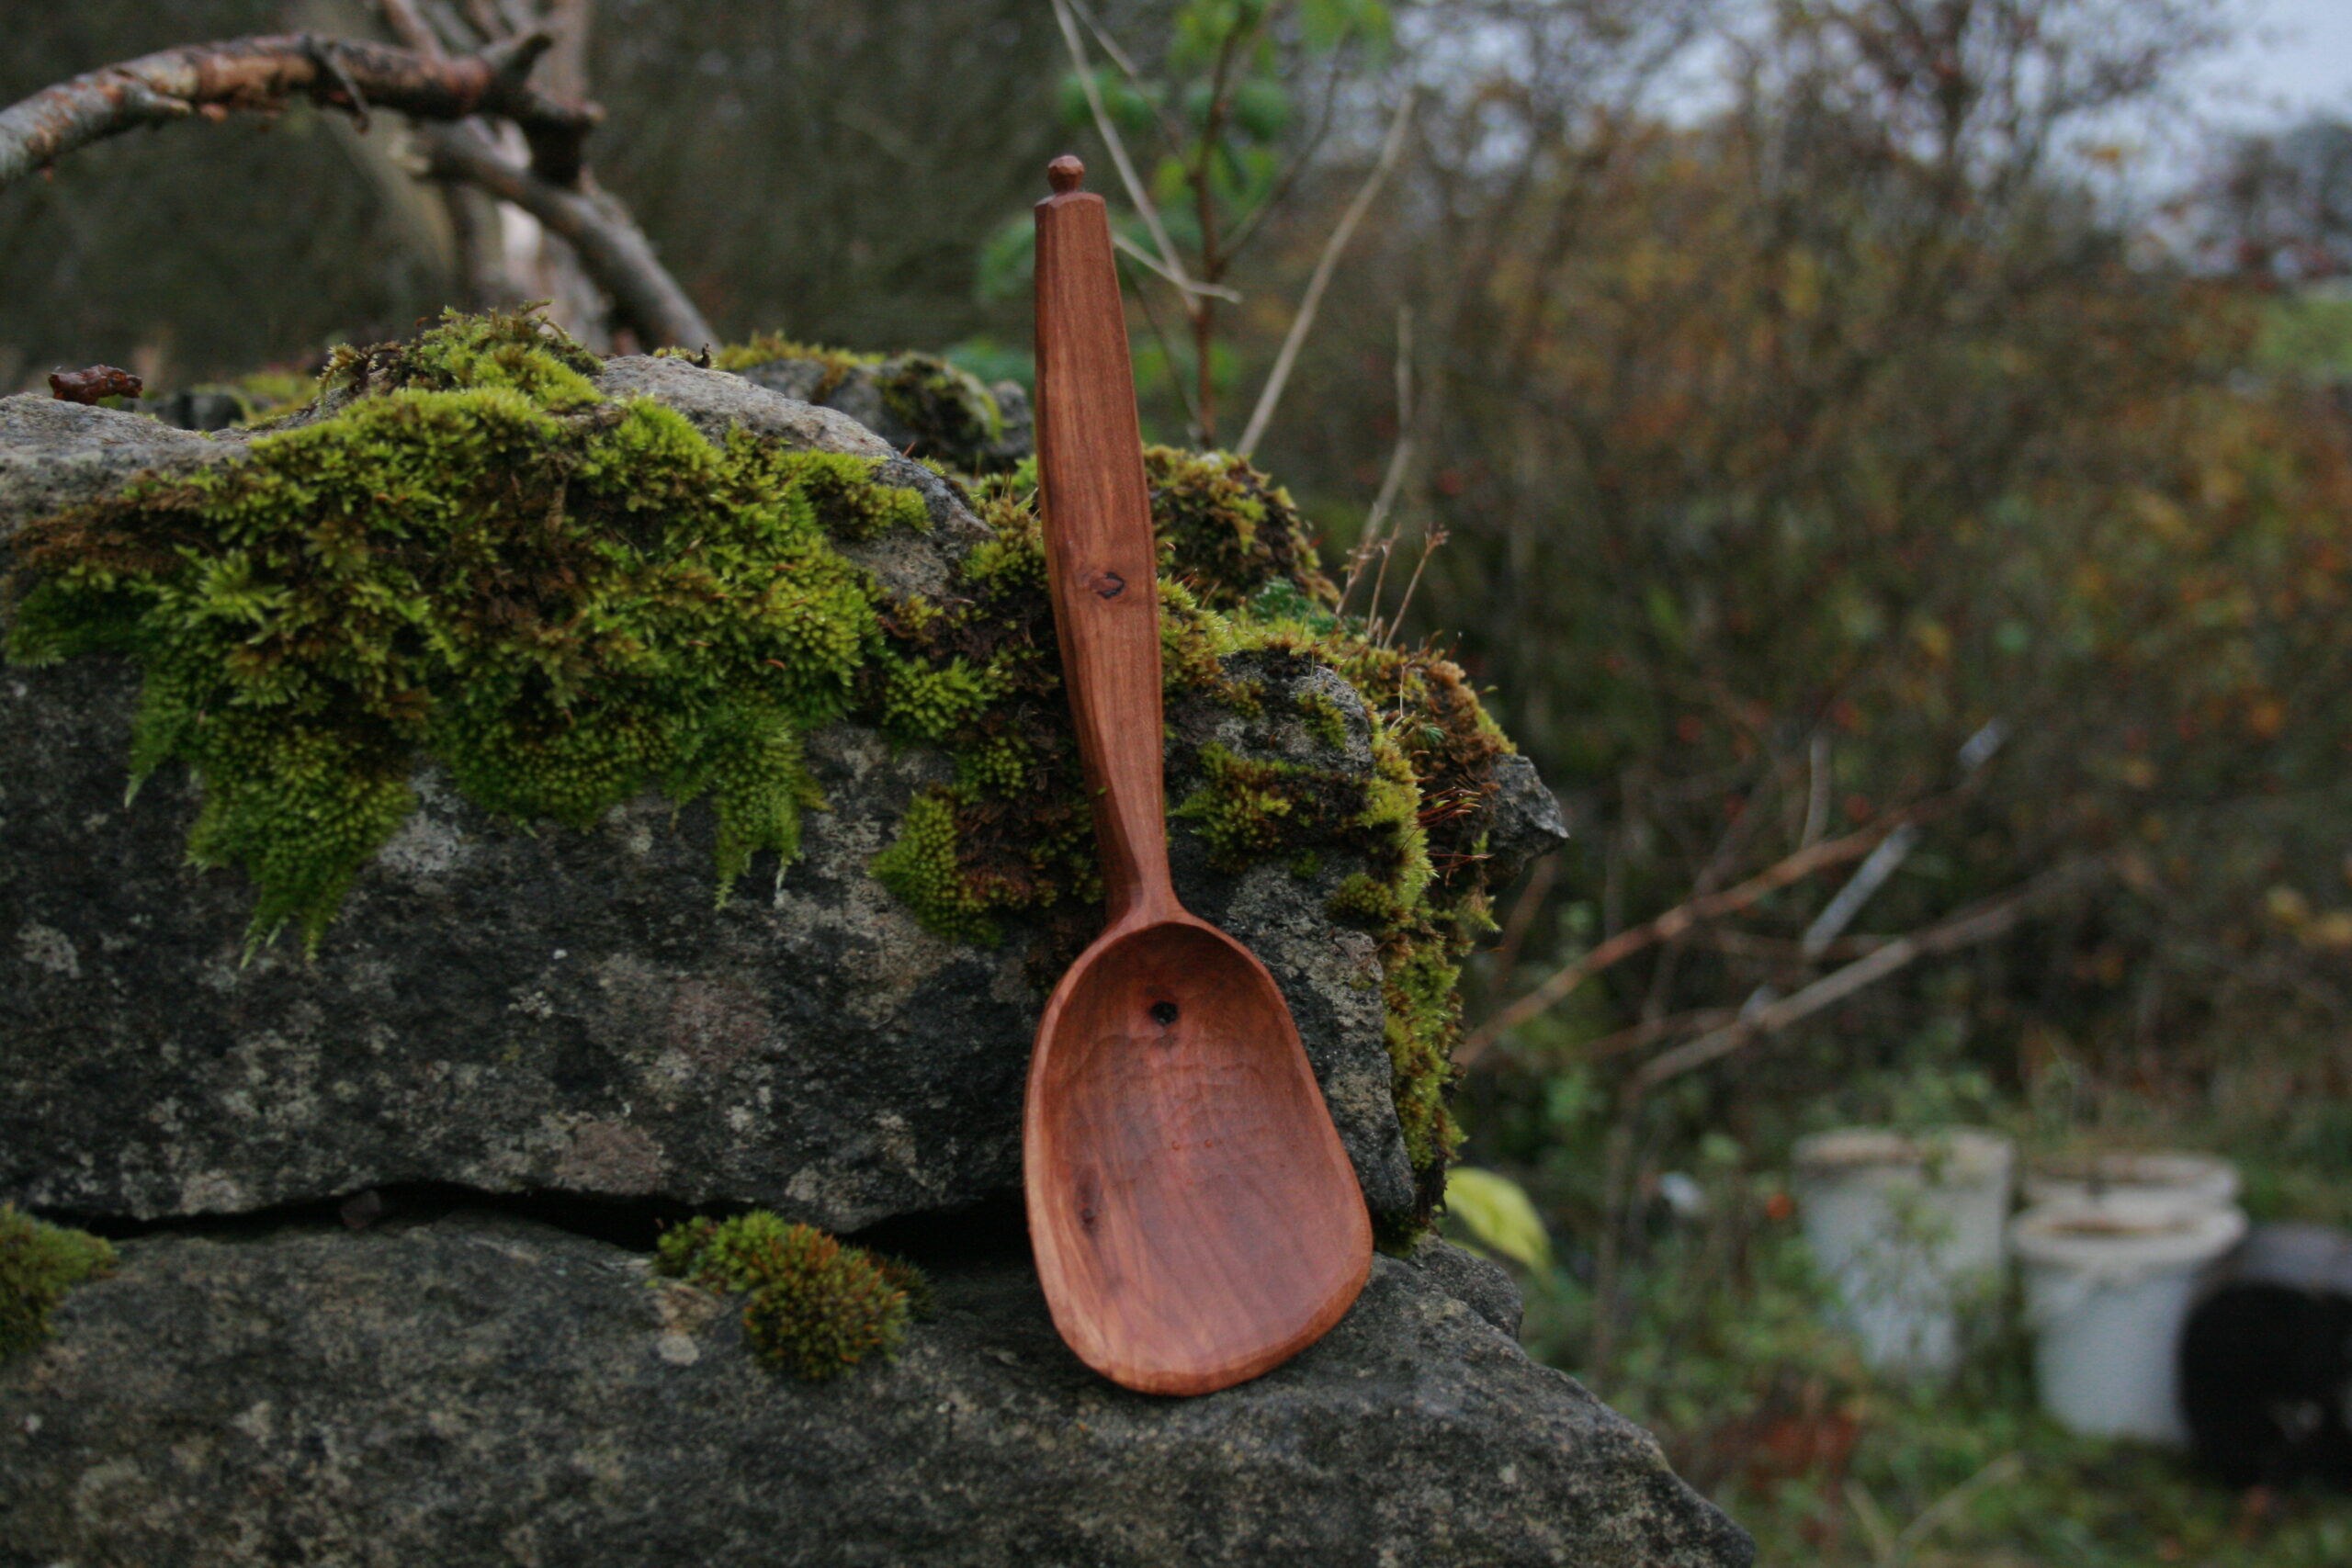 Right handed plum serving spoon